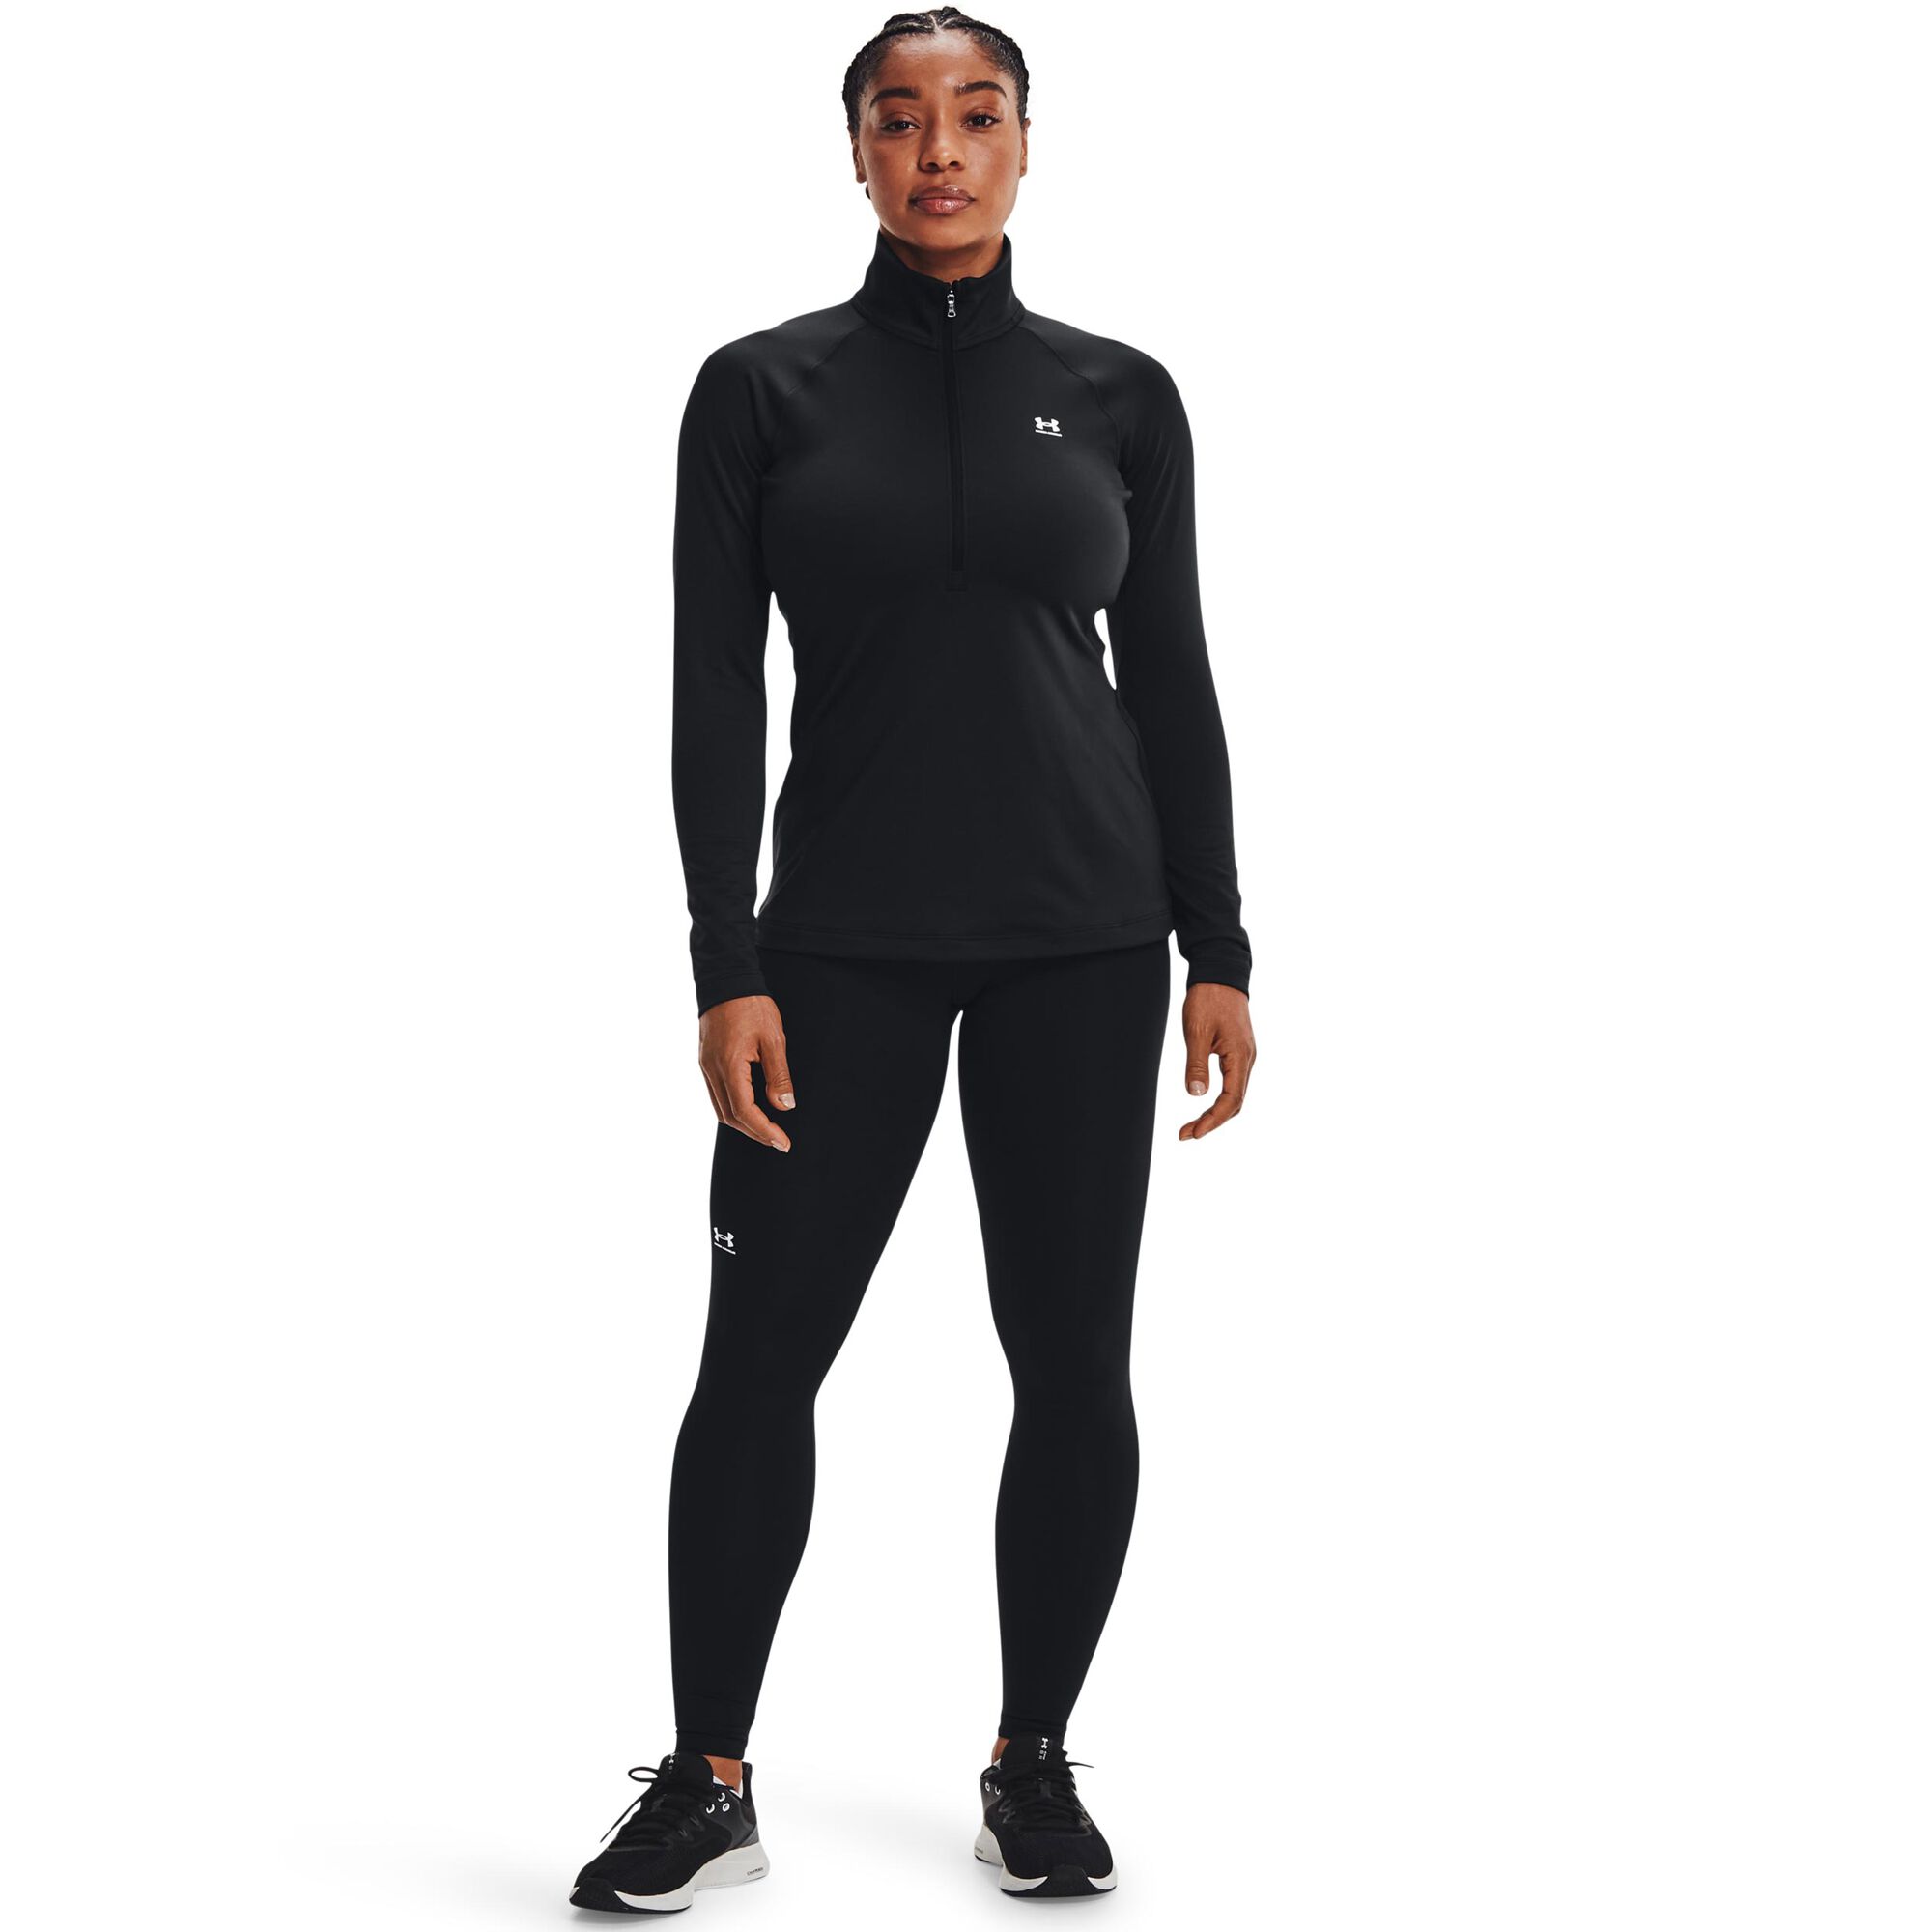 MALLAS UNDER ARMOUR MUJER CG AUTHENTICS - UNDER ARMOUR - Mujer